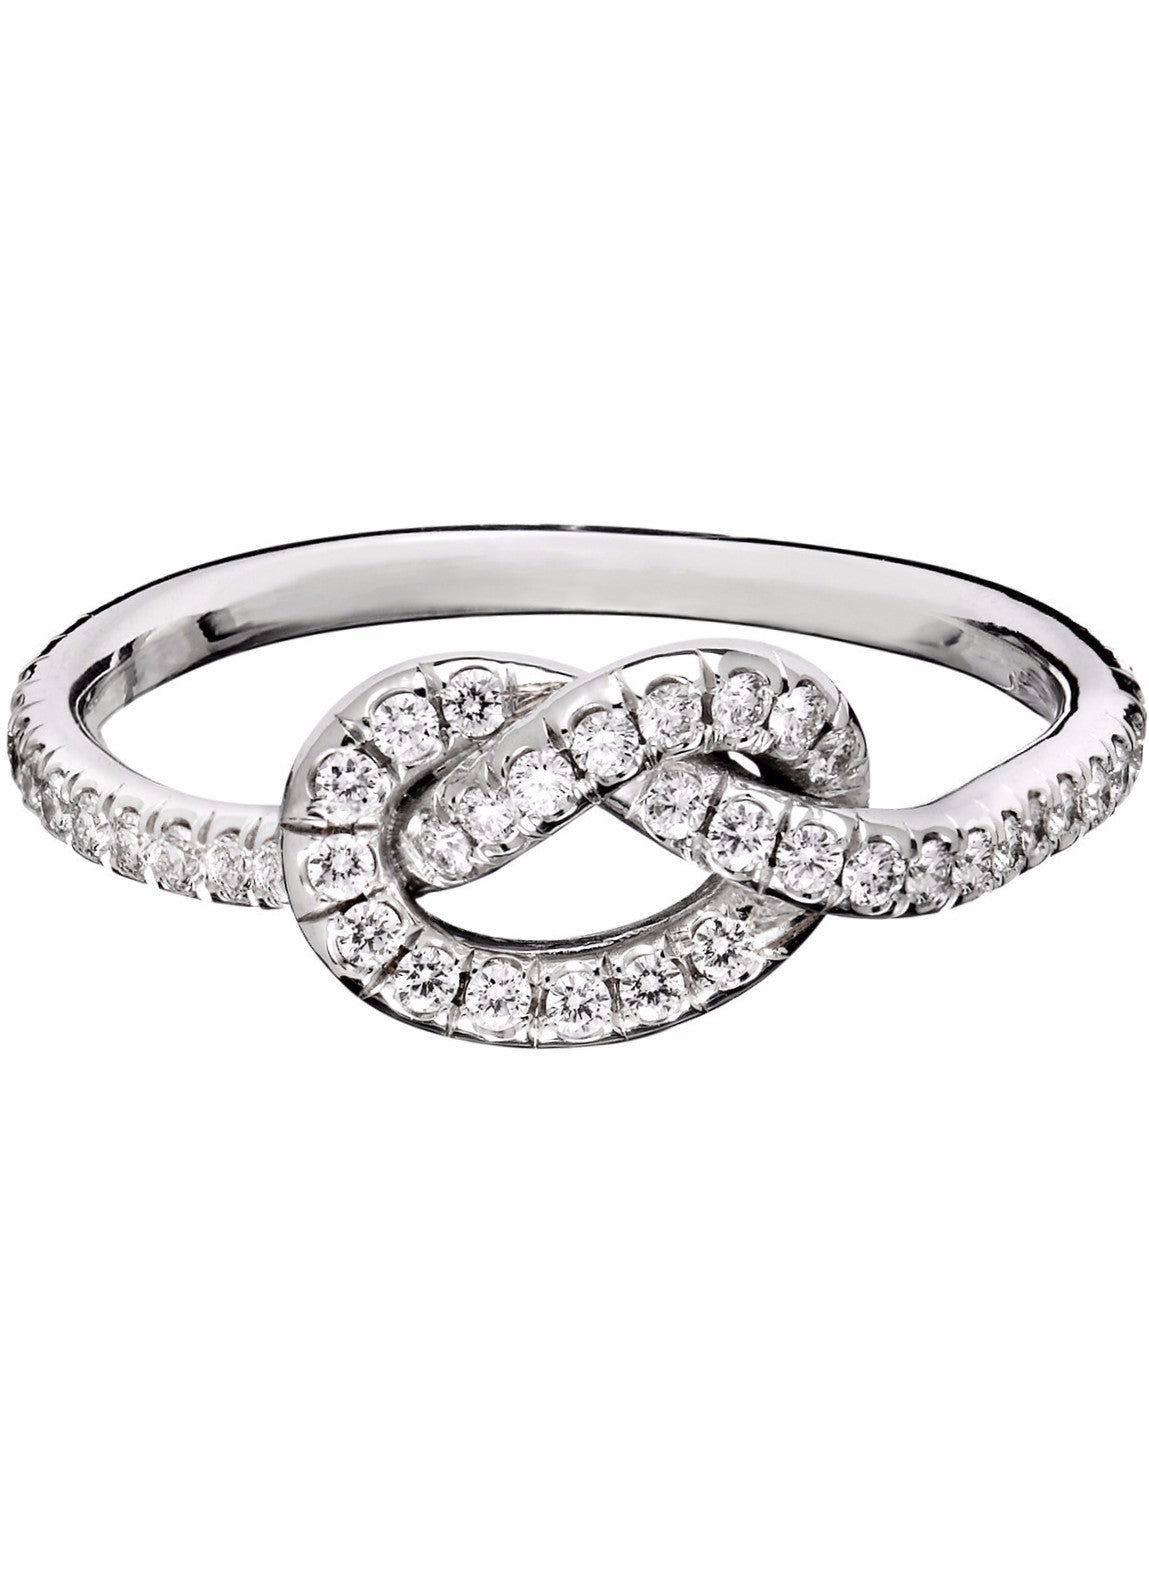 timeless pave diamond love knot ring in 18k white gold by finn by candice pool neistat